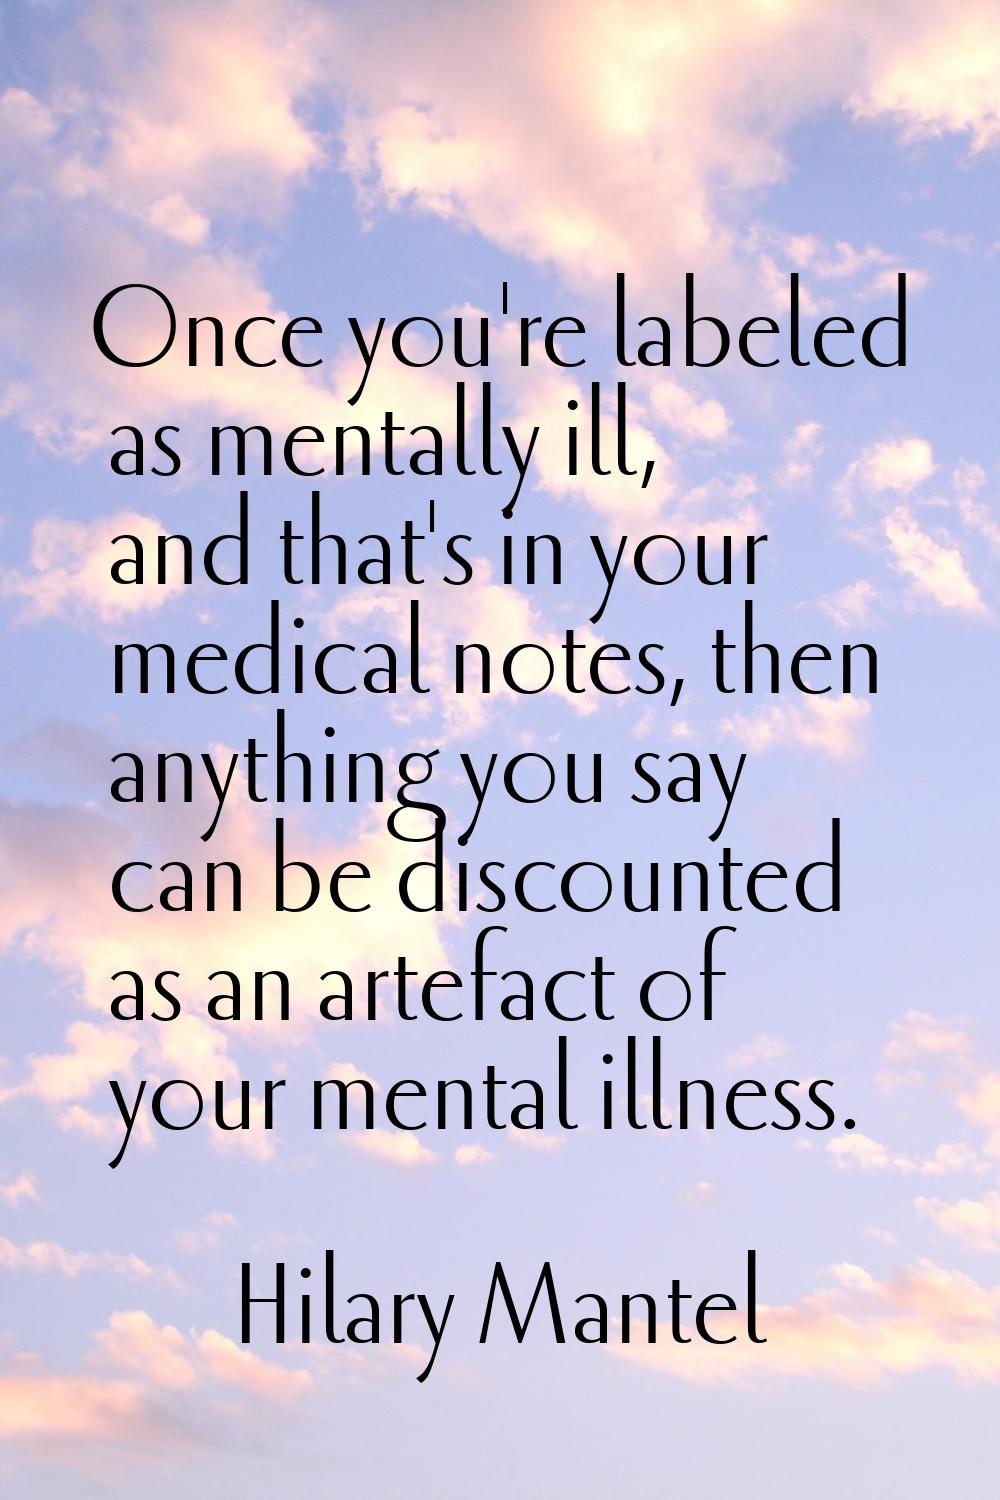 Once you're labeled as mentally ill, and that's in your medical notes, then anything you say can be